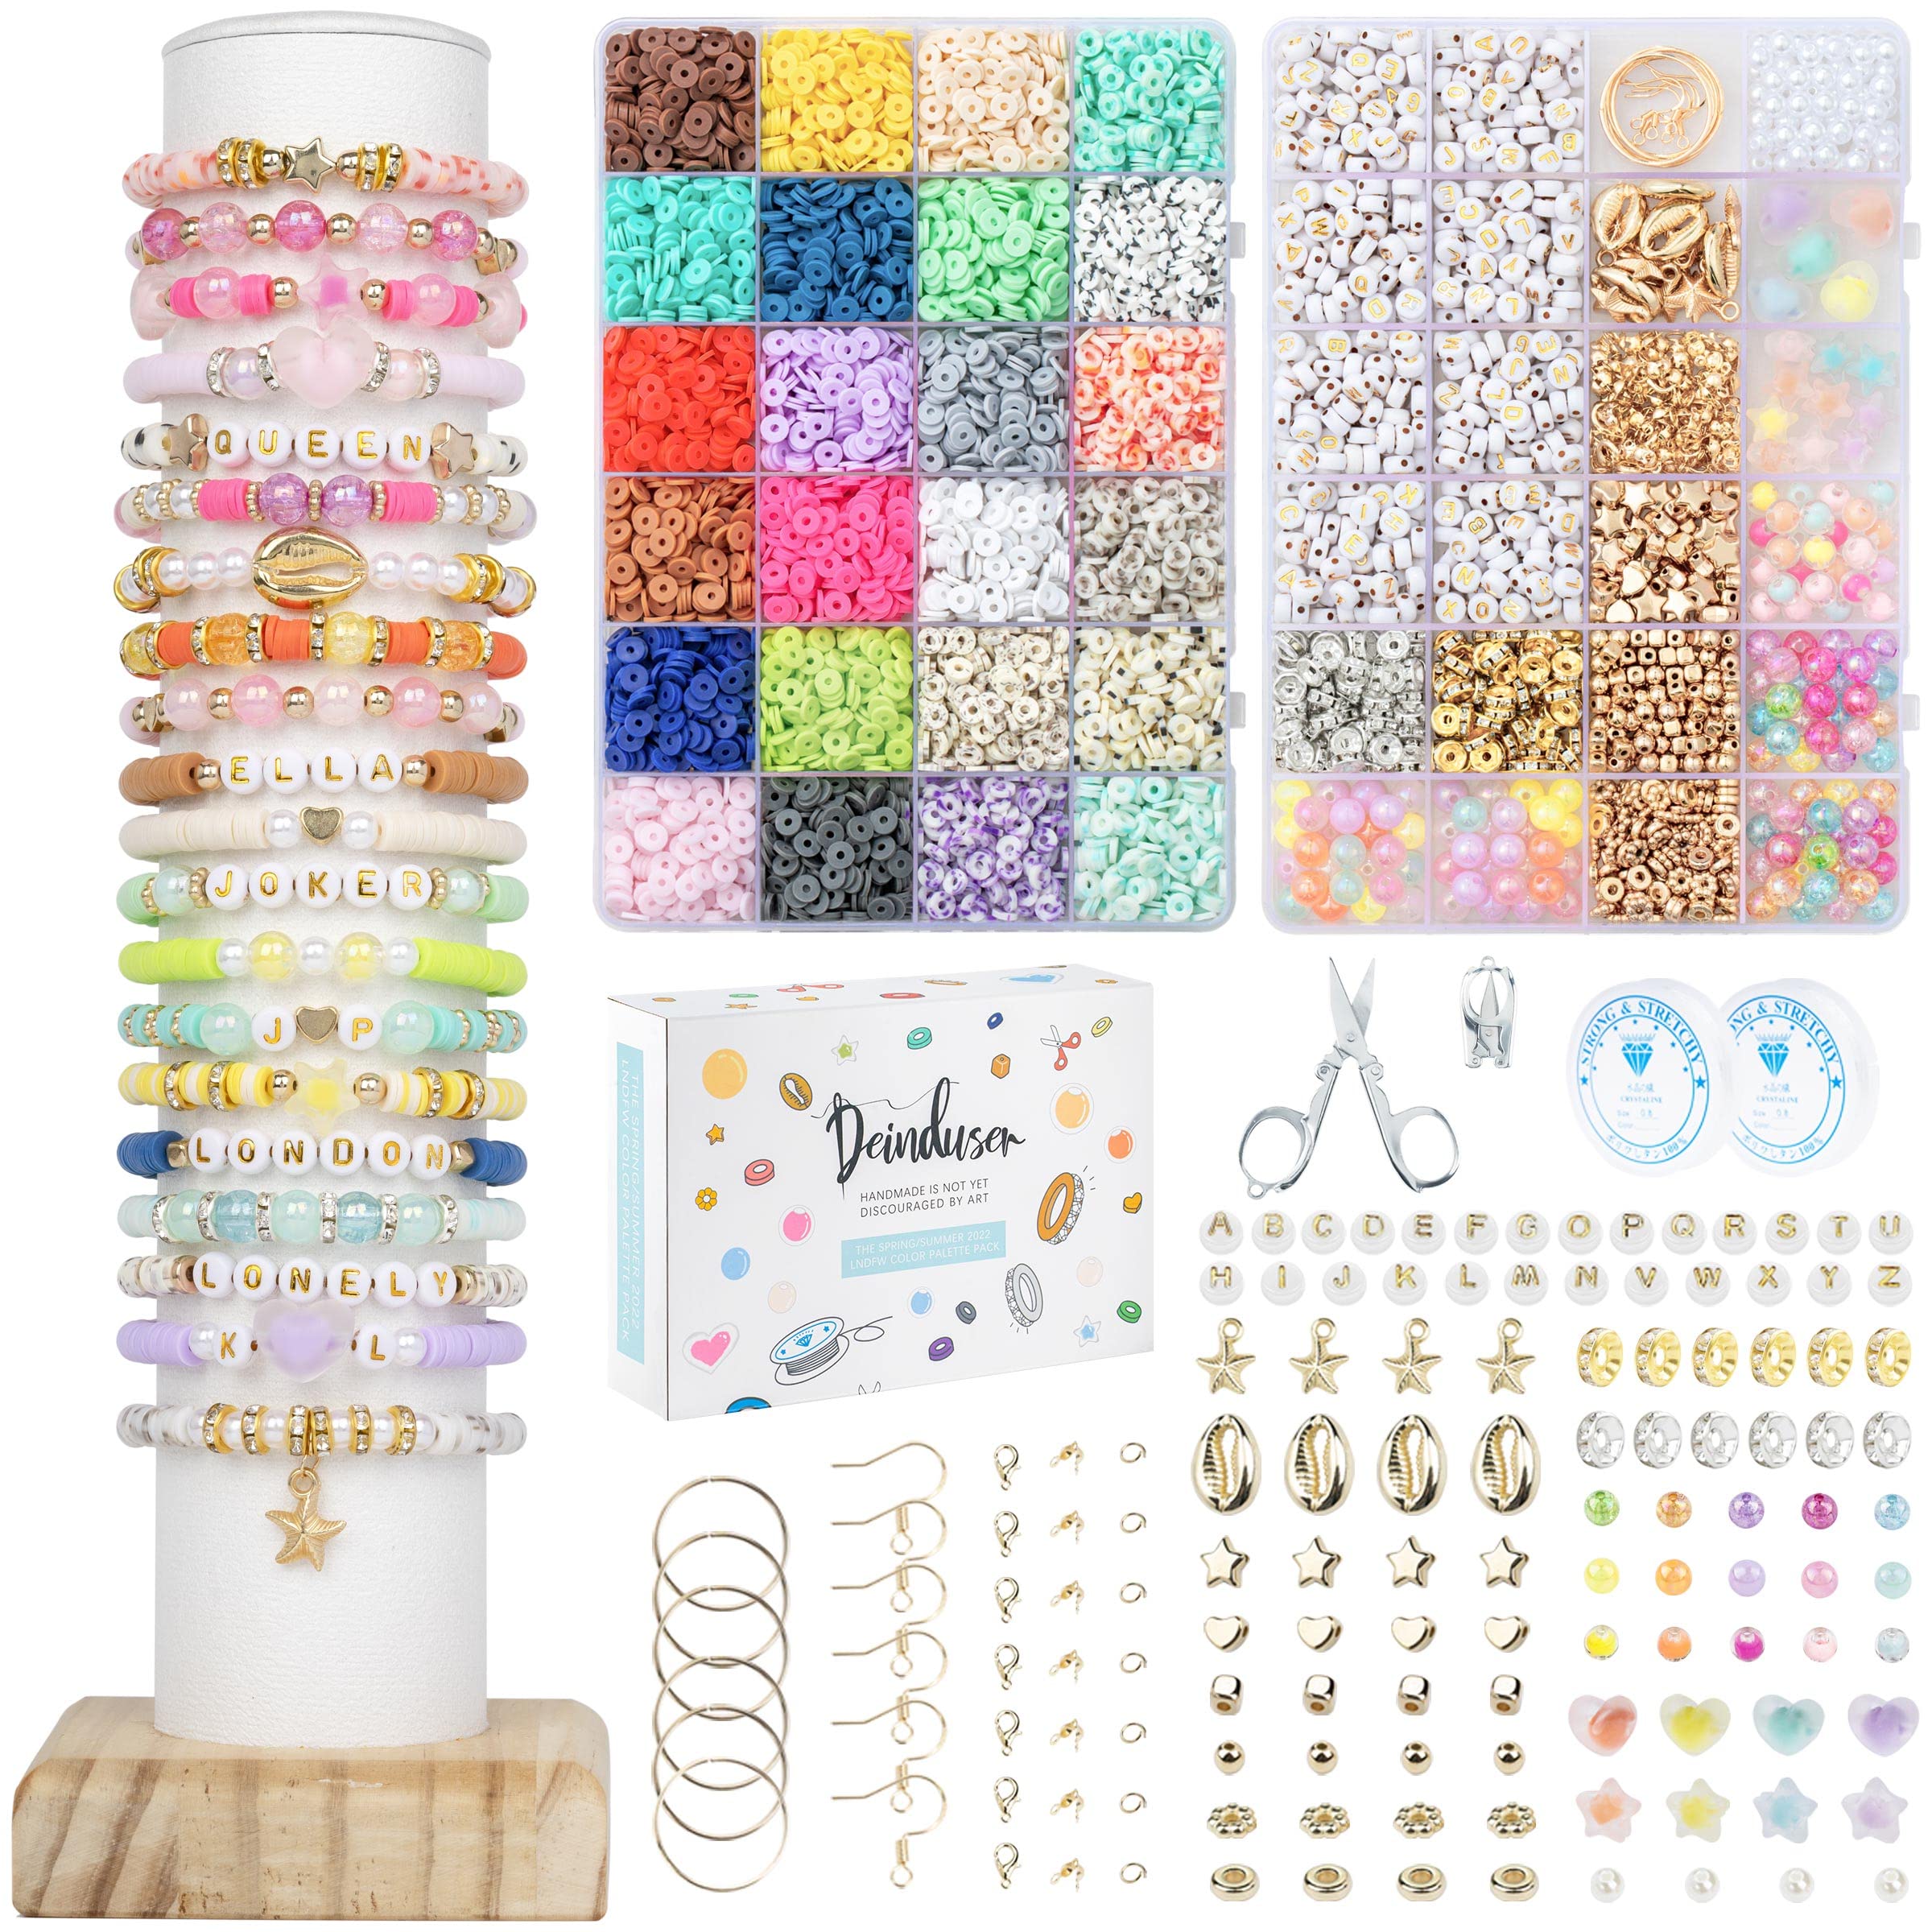 PATPAT 1150+ 20 Color Loom Rubber Bands Set, ,Gift Rainbow Rubber Bands Bracelets  Making Kit for Girls/Sisters Include Rubber Bands, Charms, Hooks, Beads,  Crochet, Loom, Clips Accessories DIY Kit at Rs 609 |